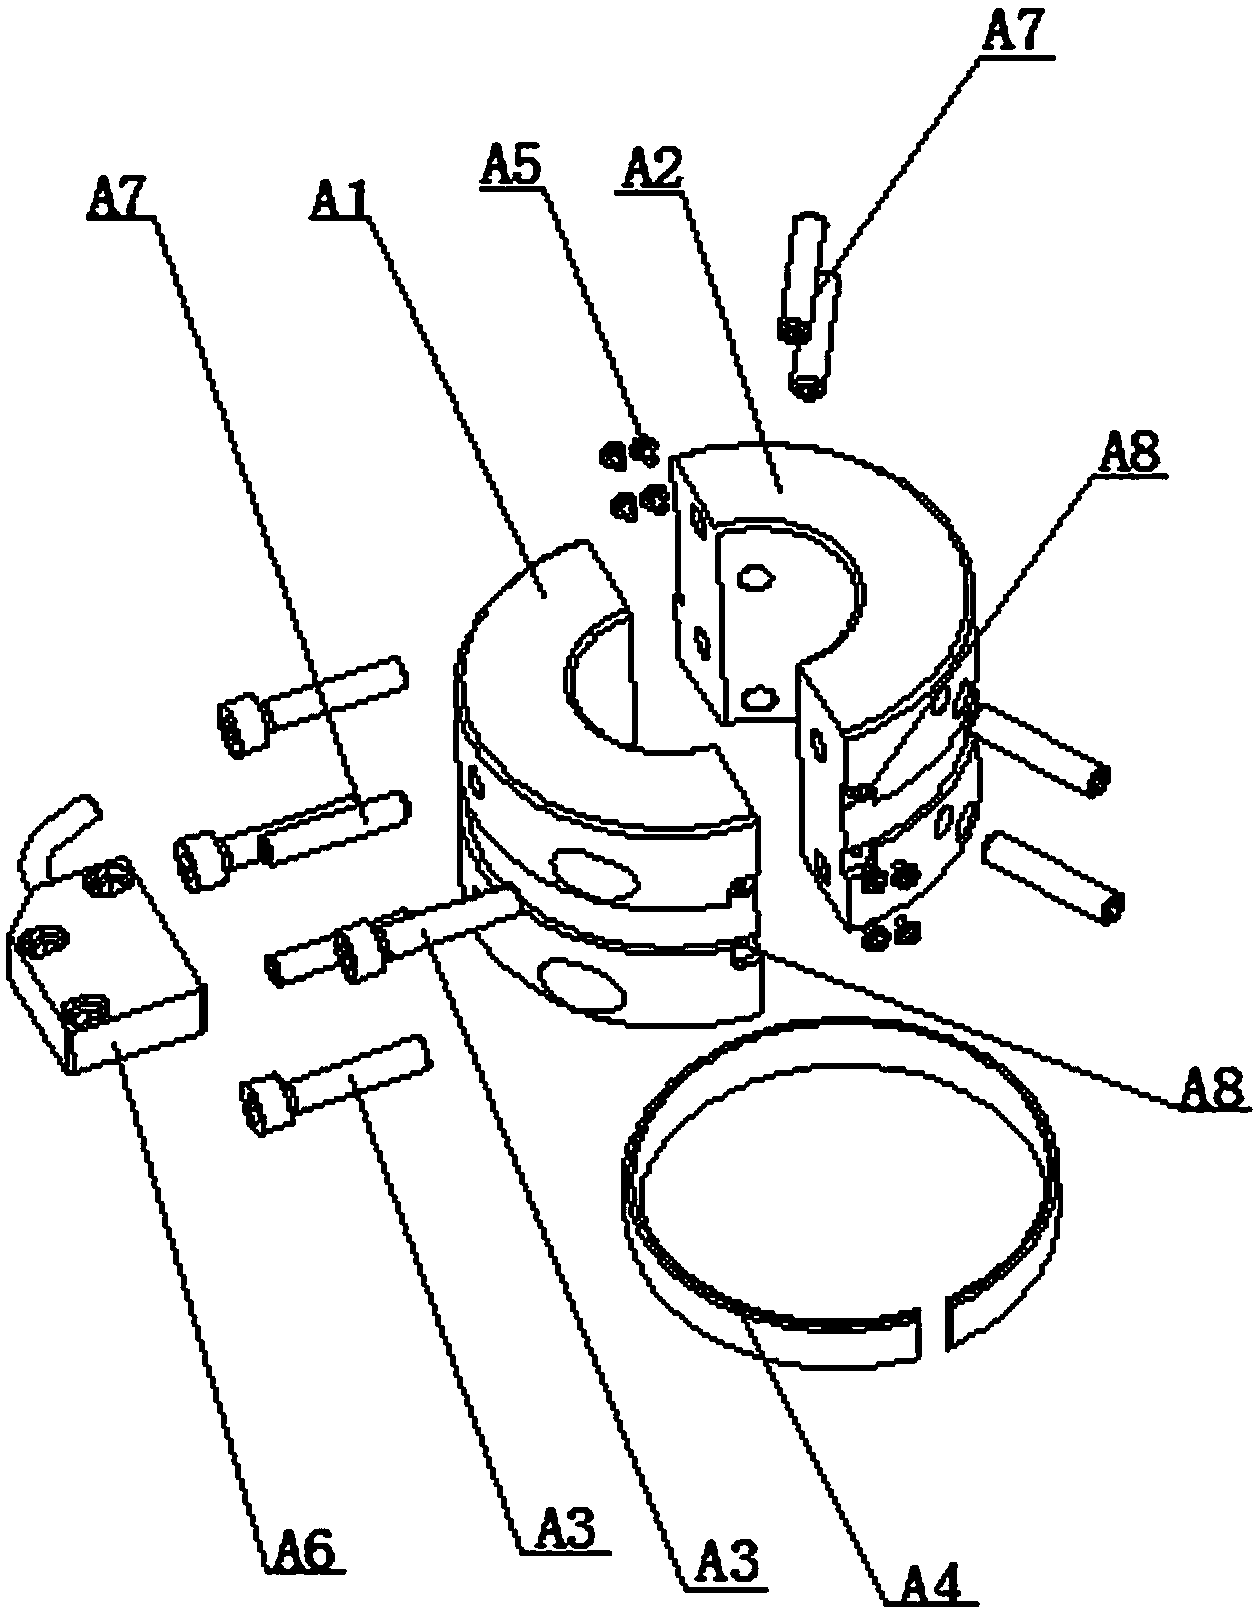 Device for measuring revolution and revolving speed of rotary shafts